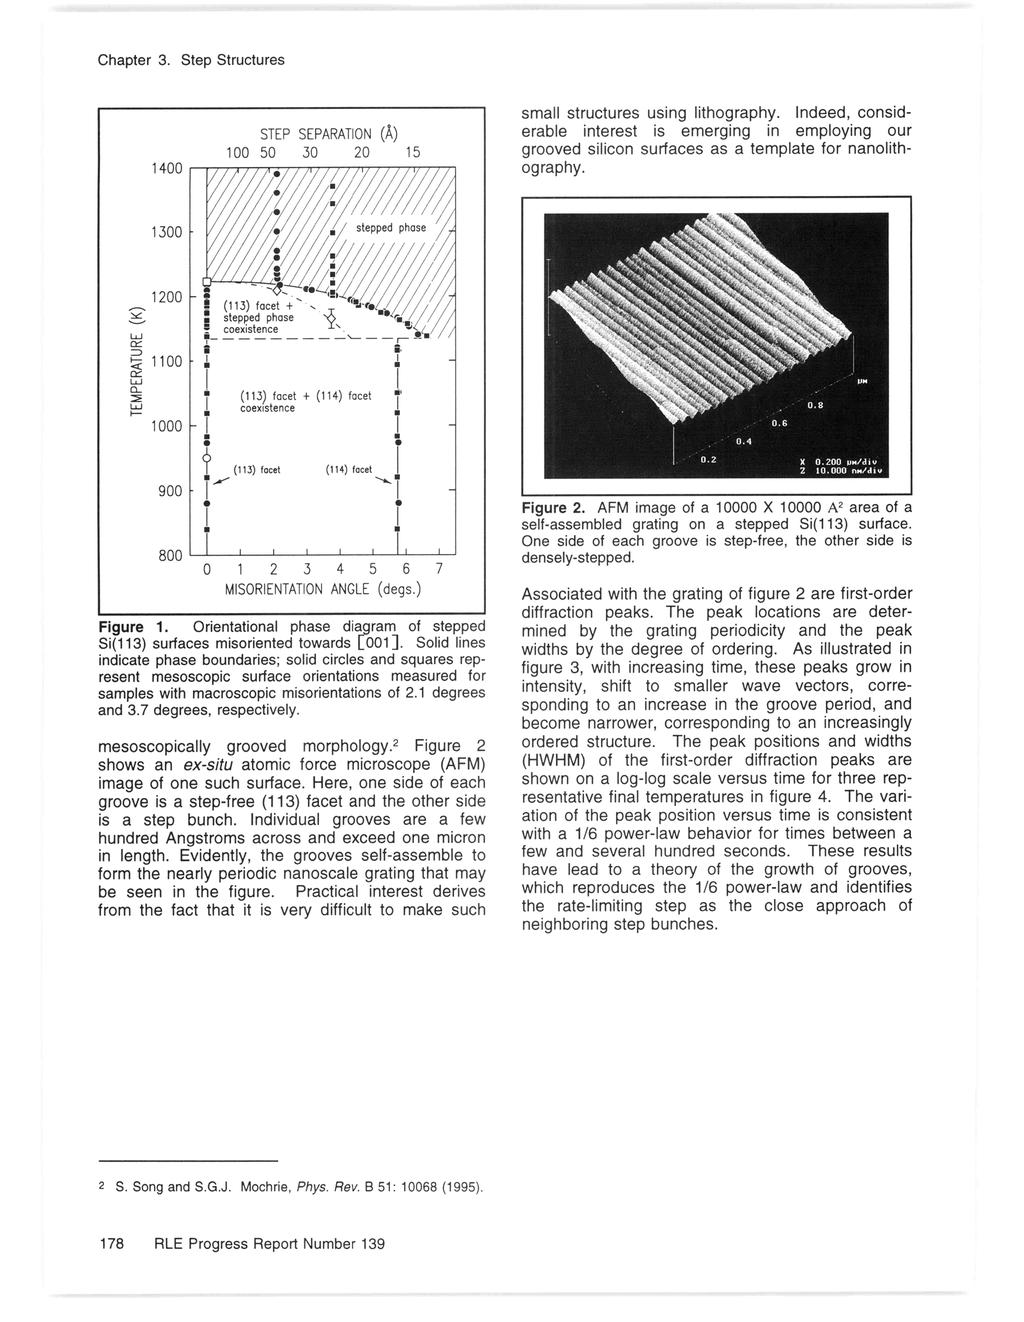 small structures using lithography. Indeed, considerable interest is emerging in employing our grooved silicon surfaces as a template for nanolithography. Figure 2.